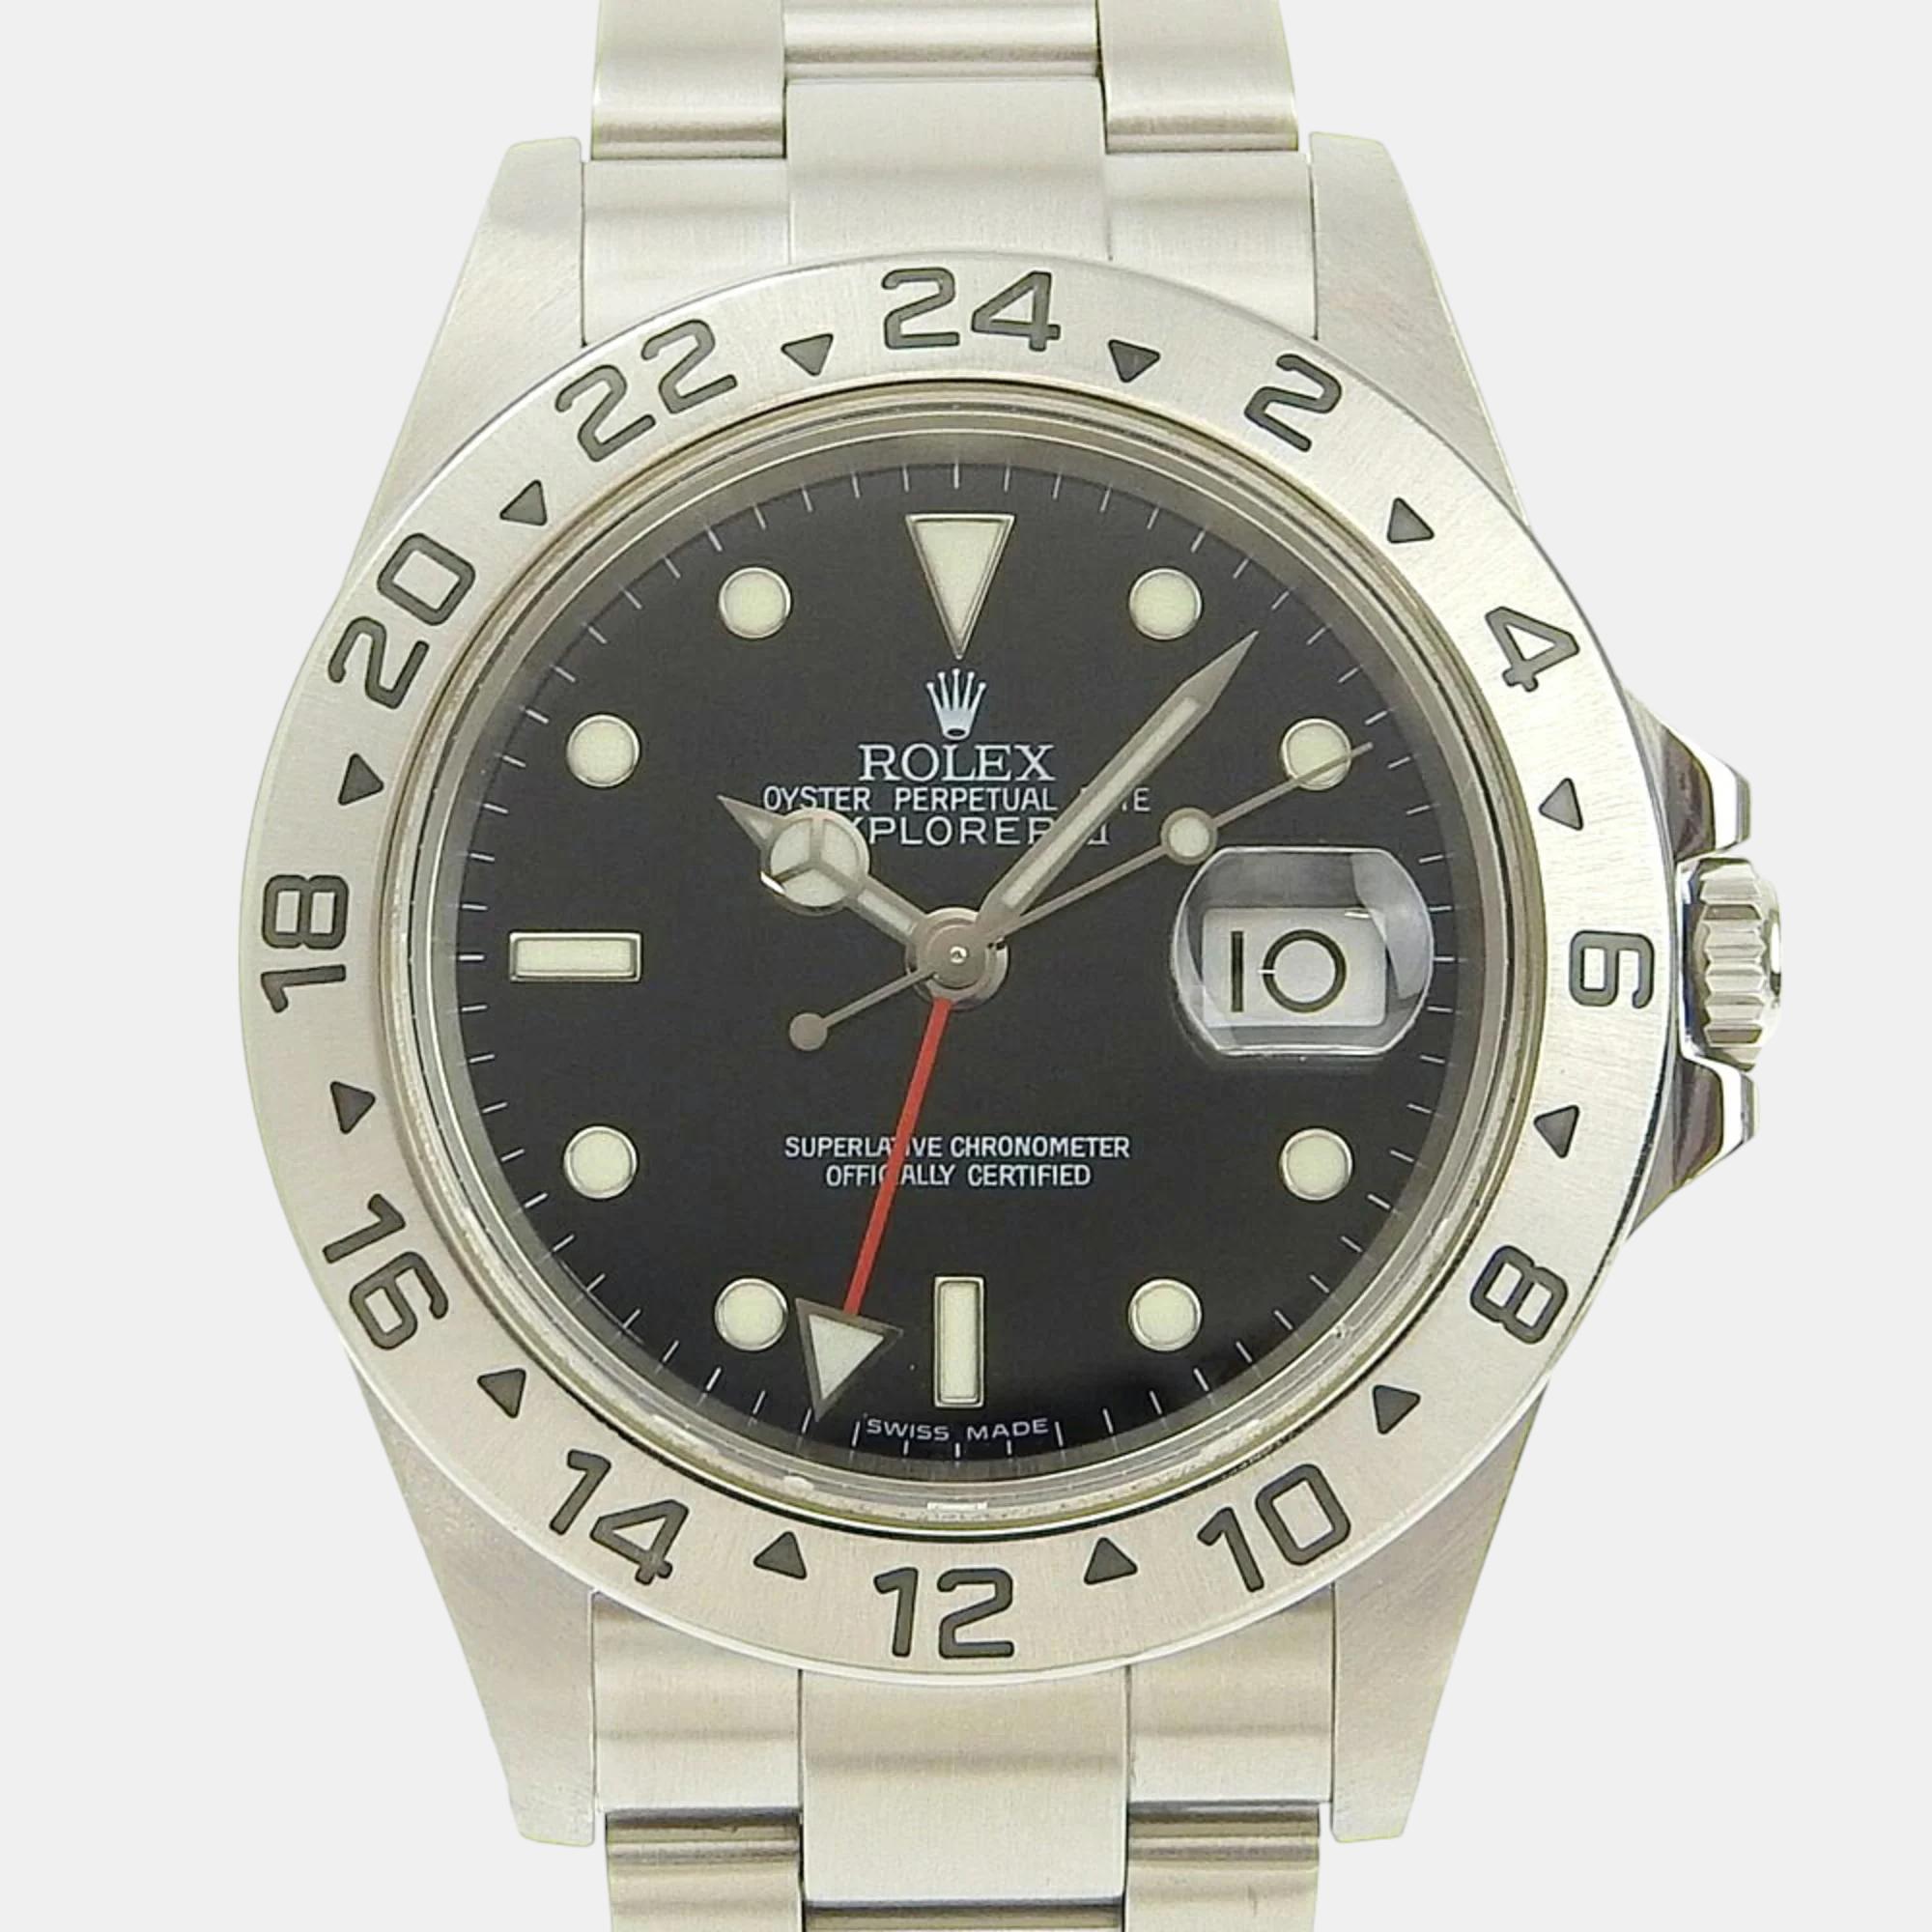 Pre-owned Rolex Black Stainless Steel Explorer Ii 16570 Automatic Men's Wristwatch 40 Mm